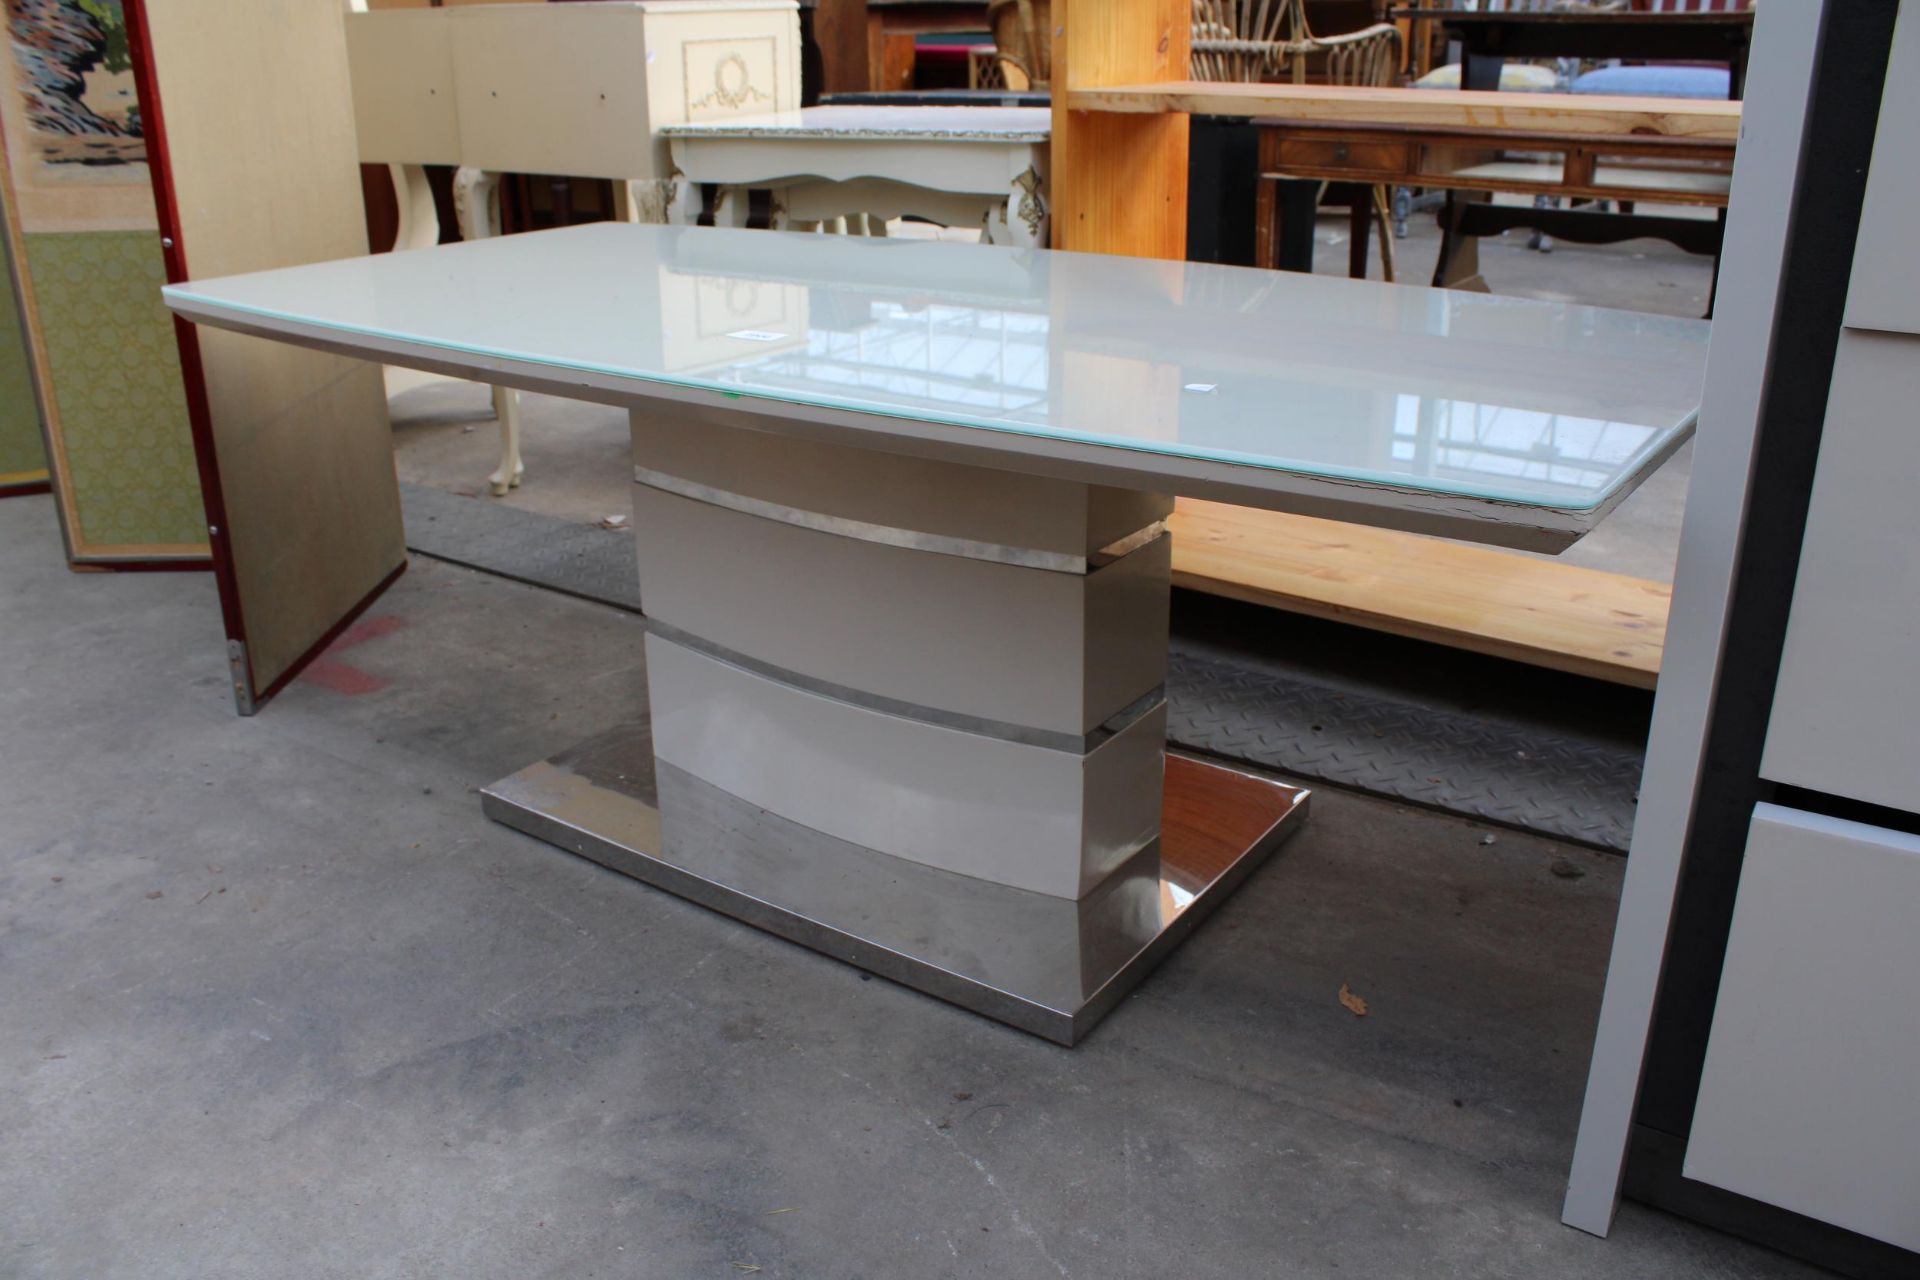 A MILAN STYLE COFFEE TABLE WITH GLASS TOP AND POLISHED CHROME BASE 47" X 24" - Image 2 of 2